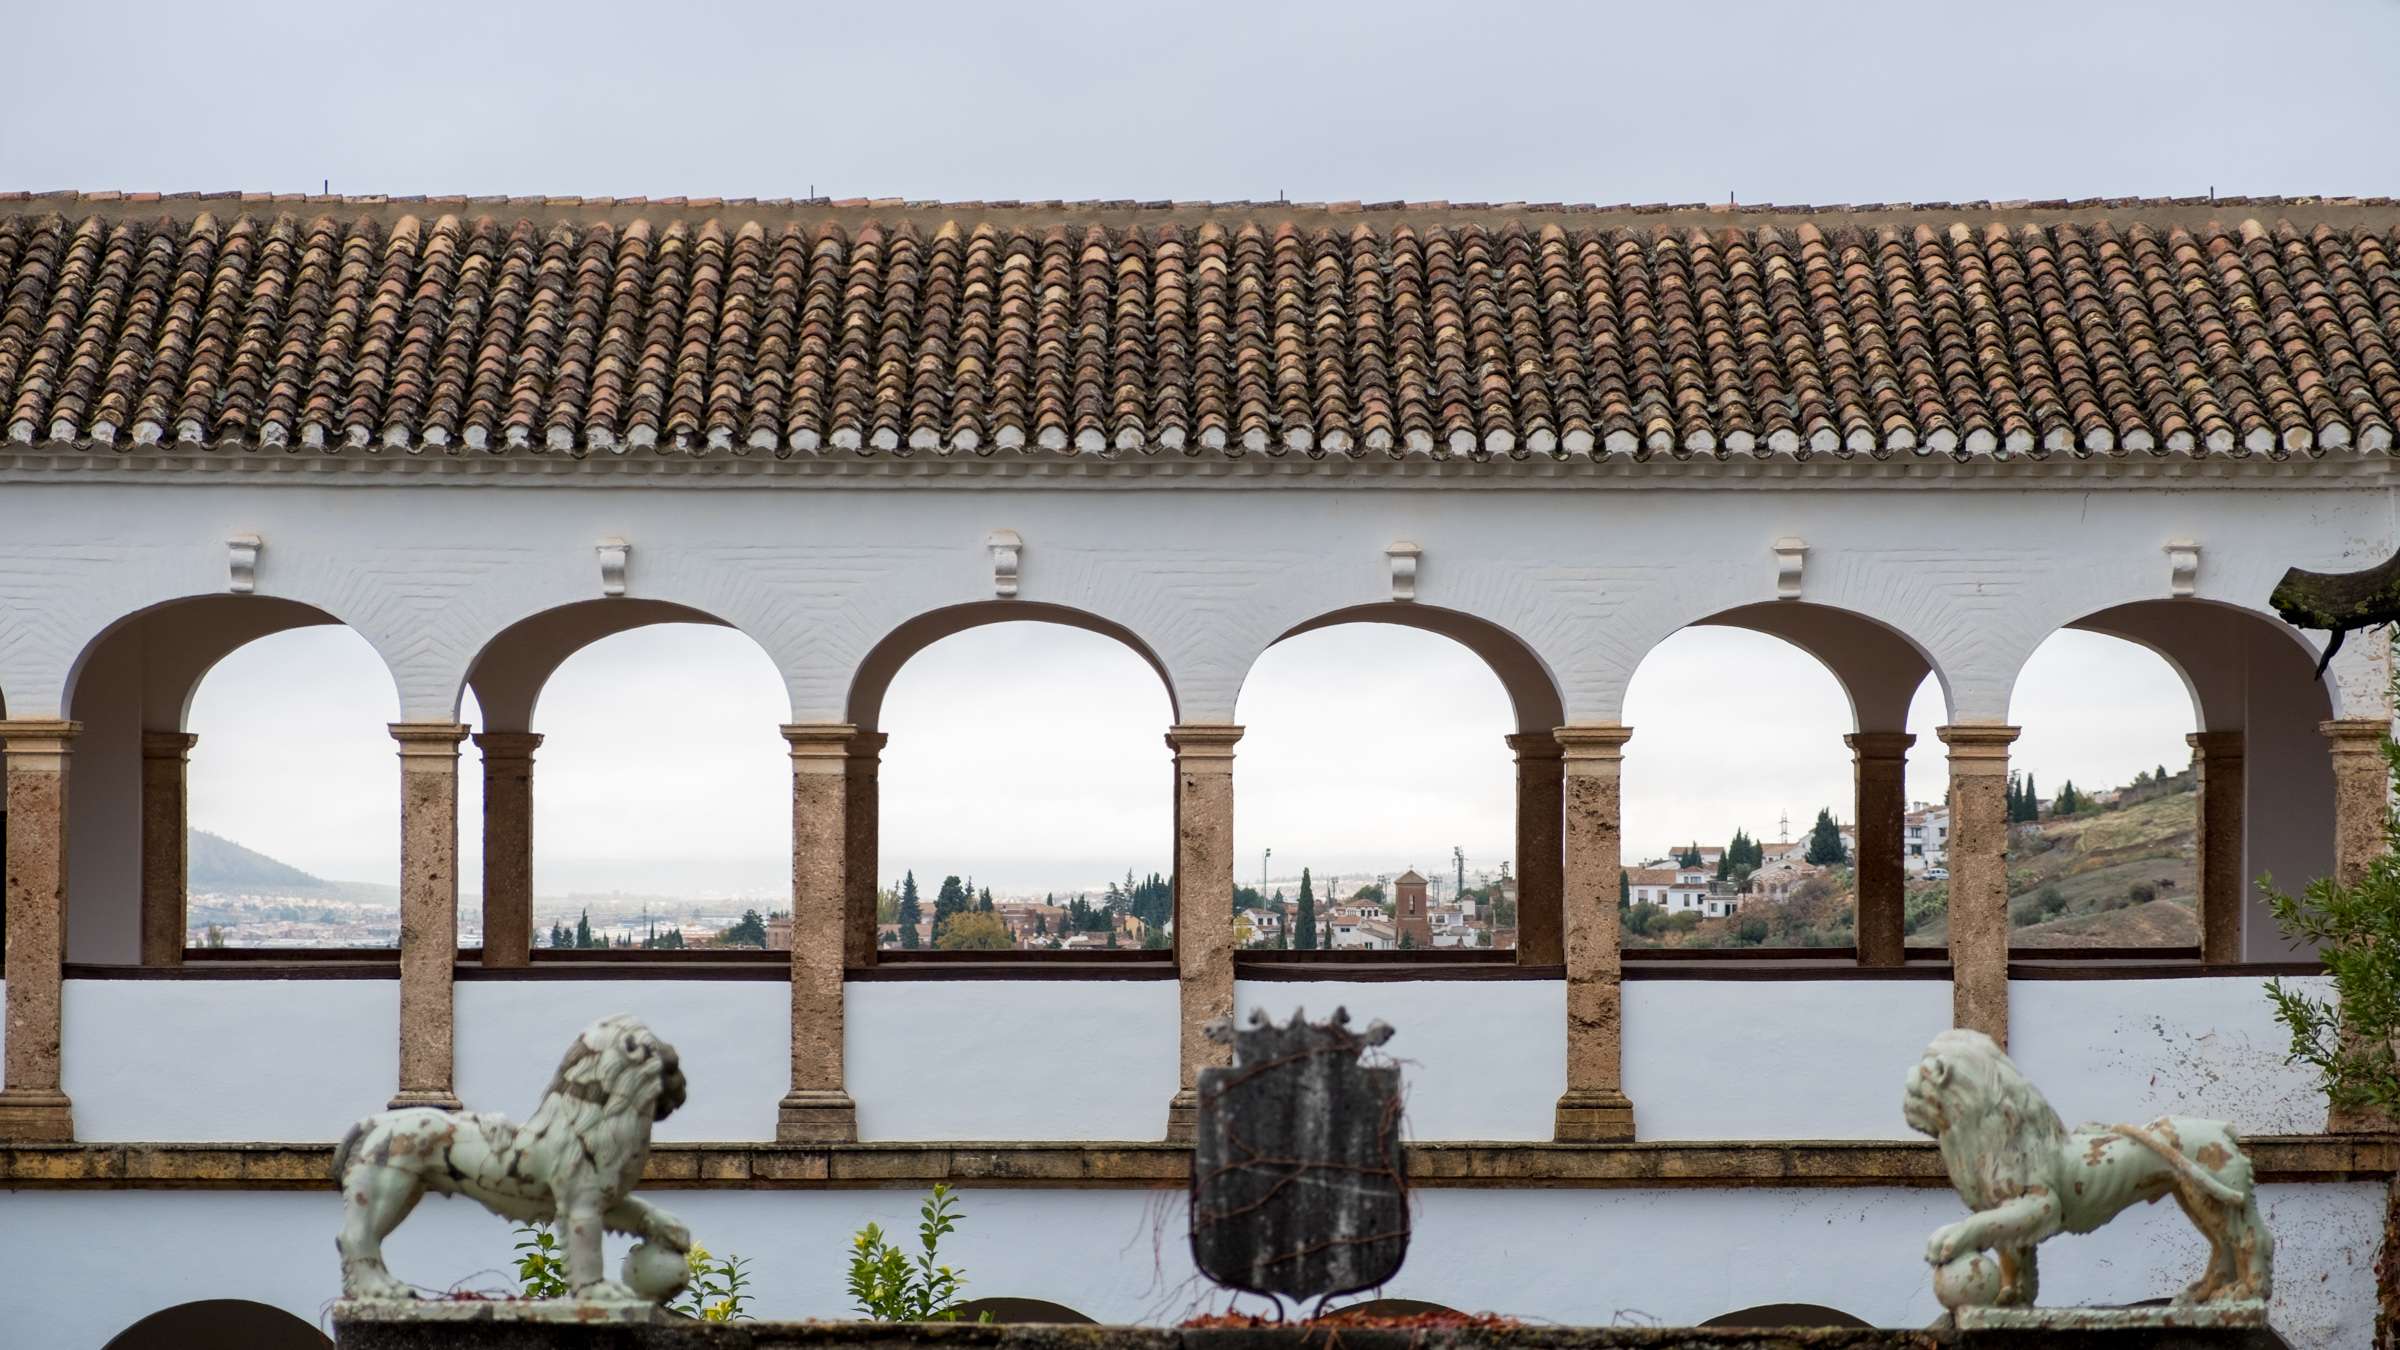 Terrace overlooking Granada in the Generalife Palace, The Alhambra